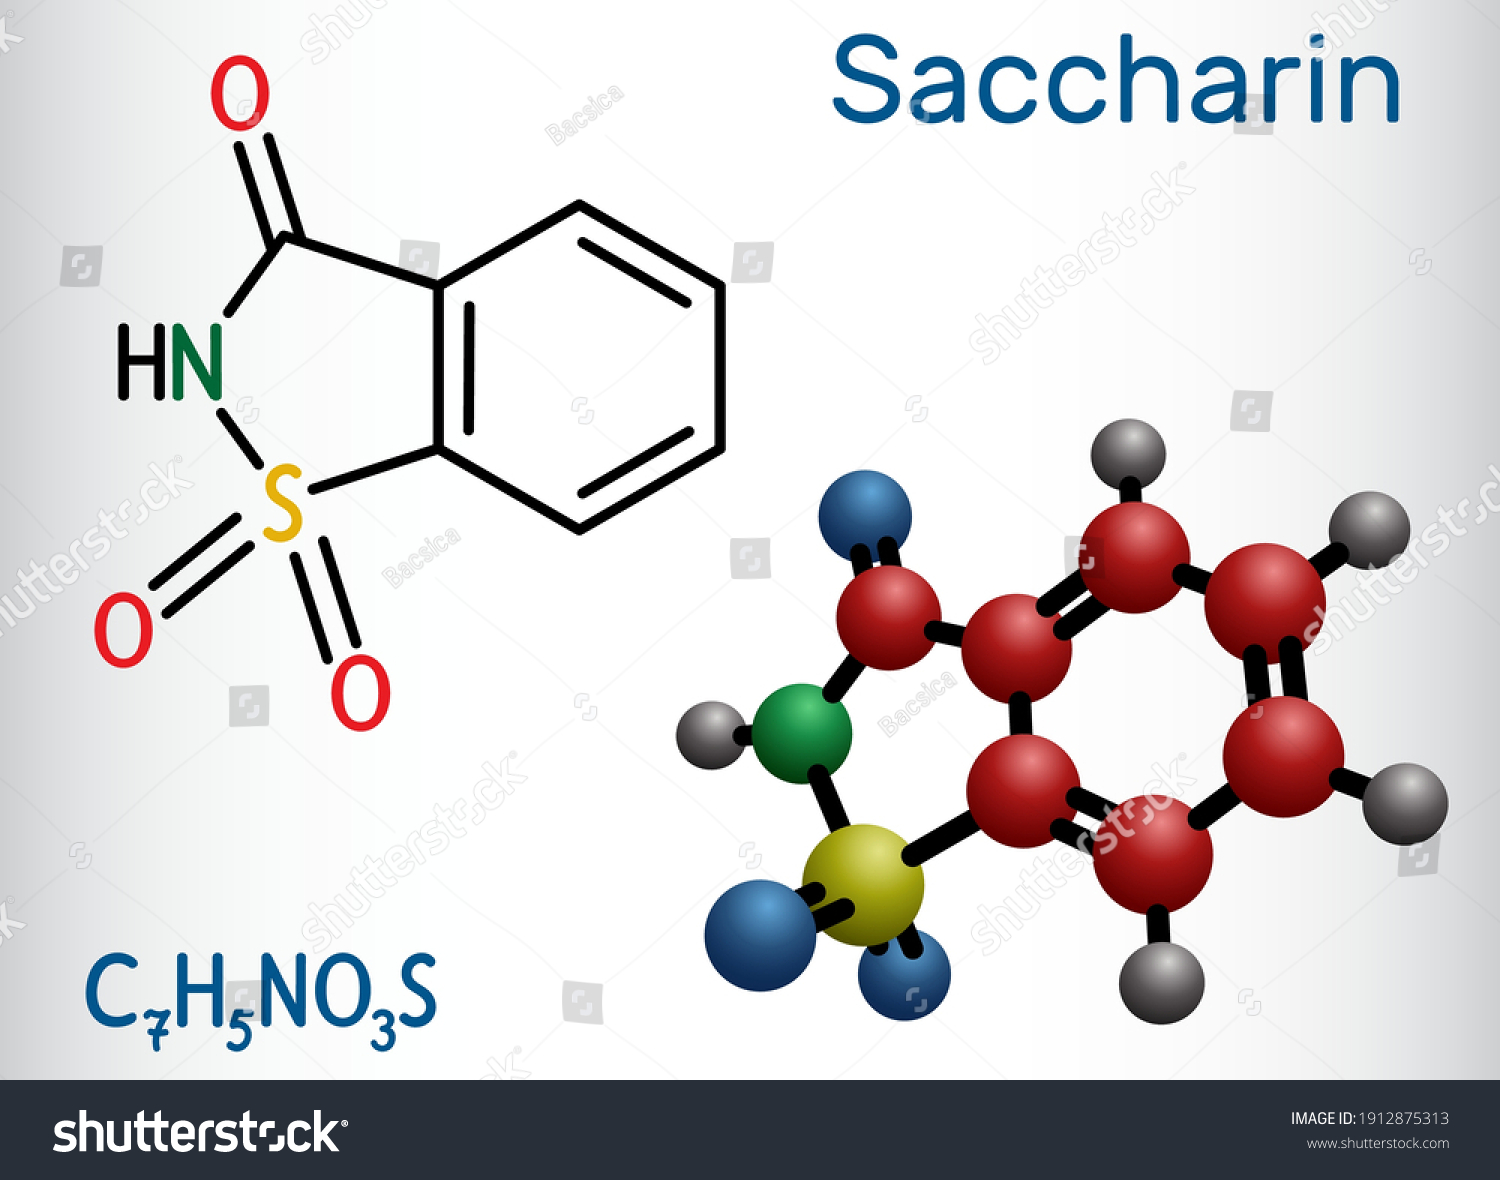 SVG of Saccharin molecule. It is artificial sweetener, sweetening agent, xenobiotic and environmental contaminant. Structural chemical formula and molecule model. Vector illustration svg